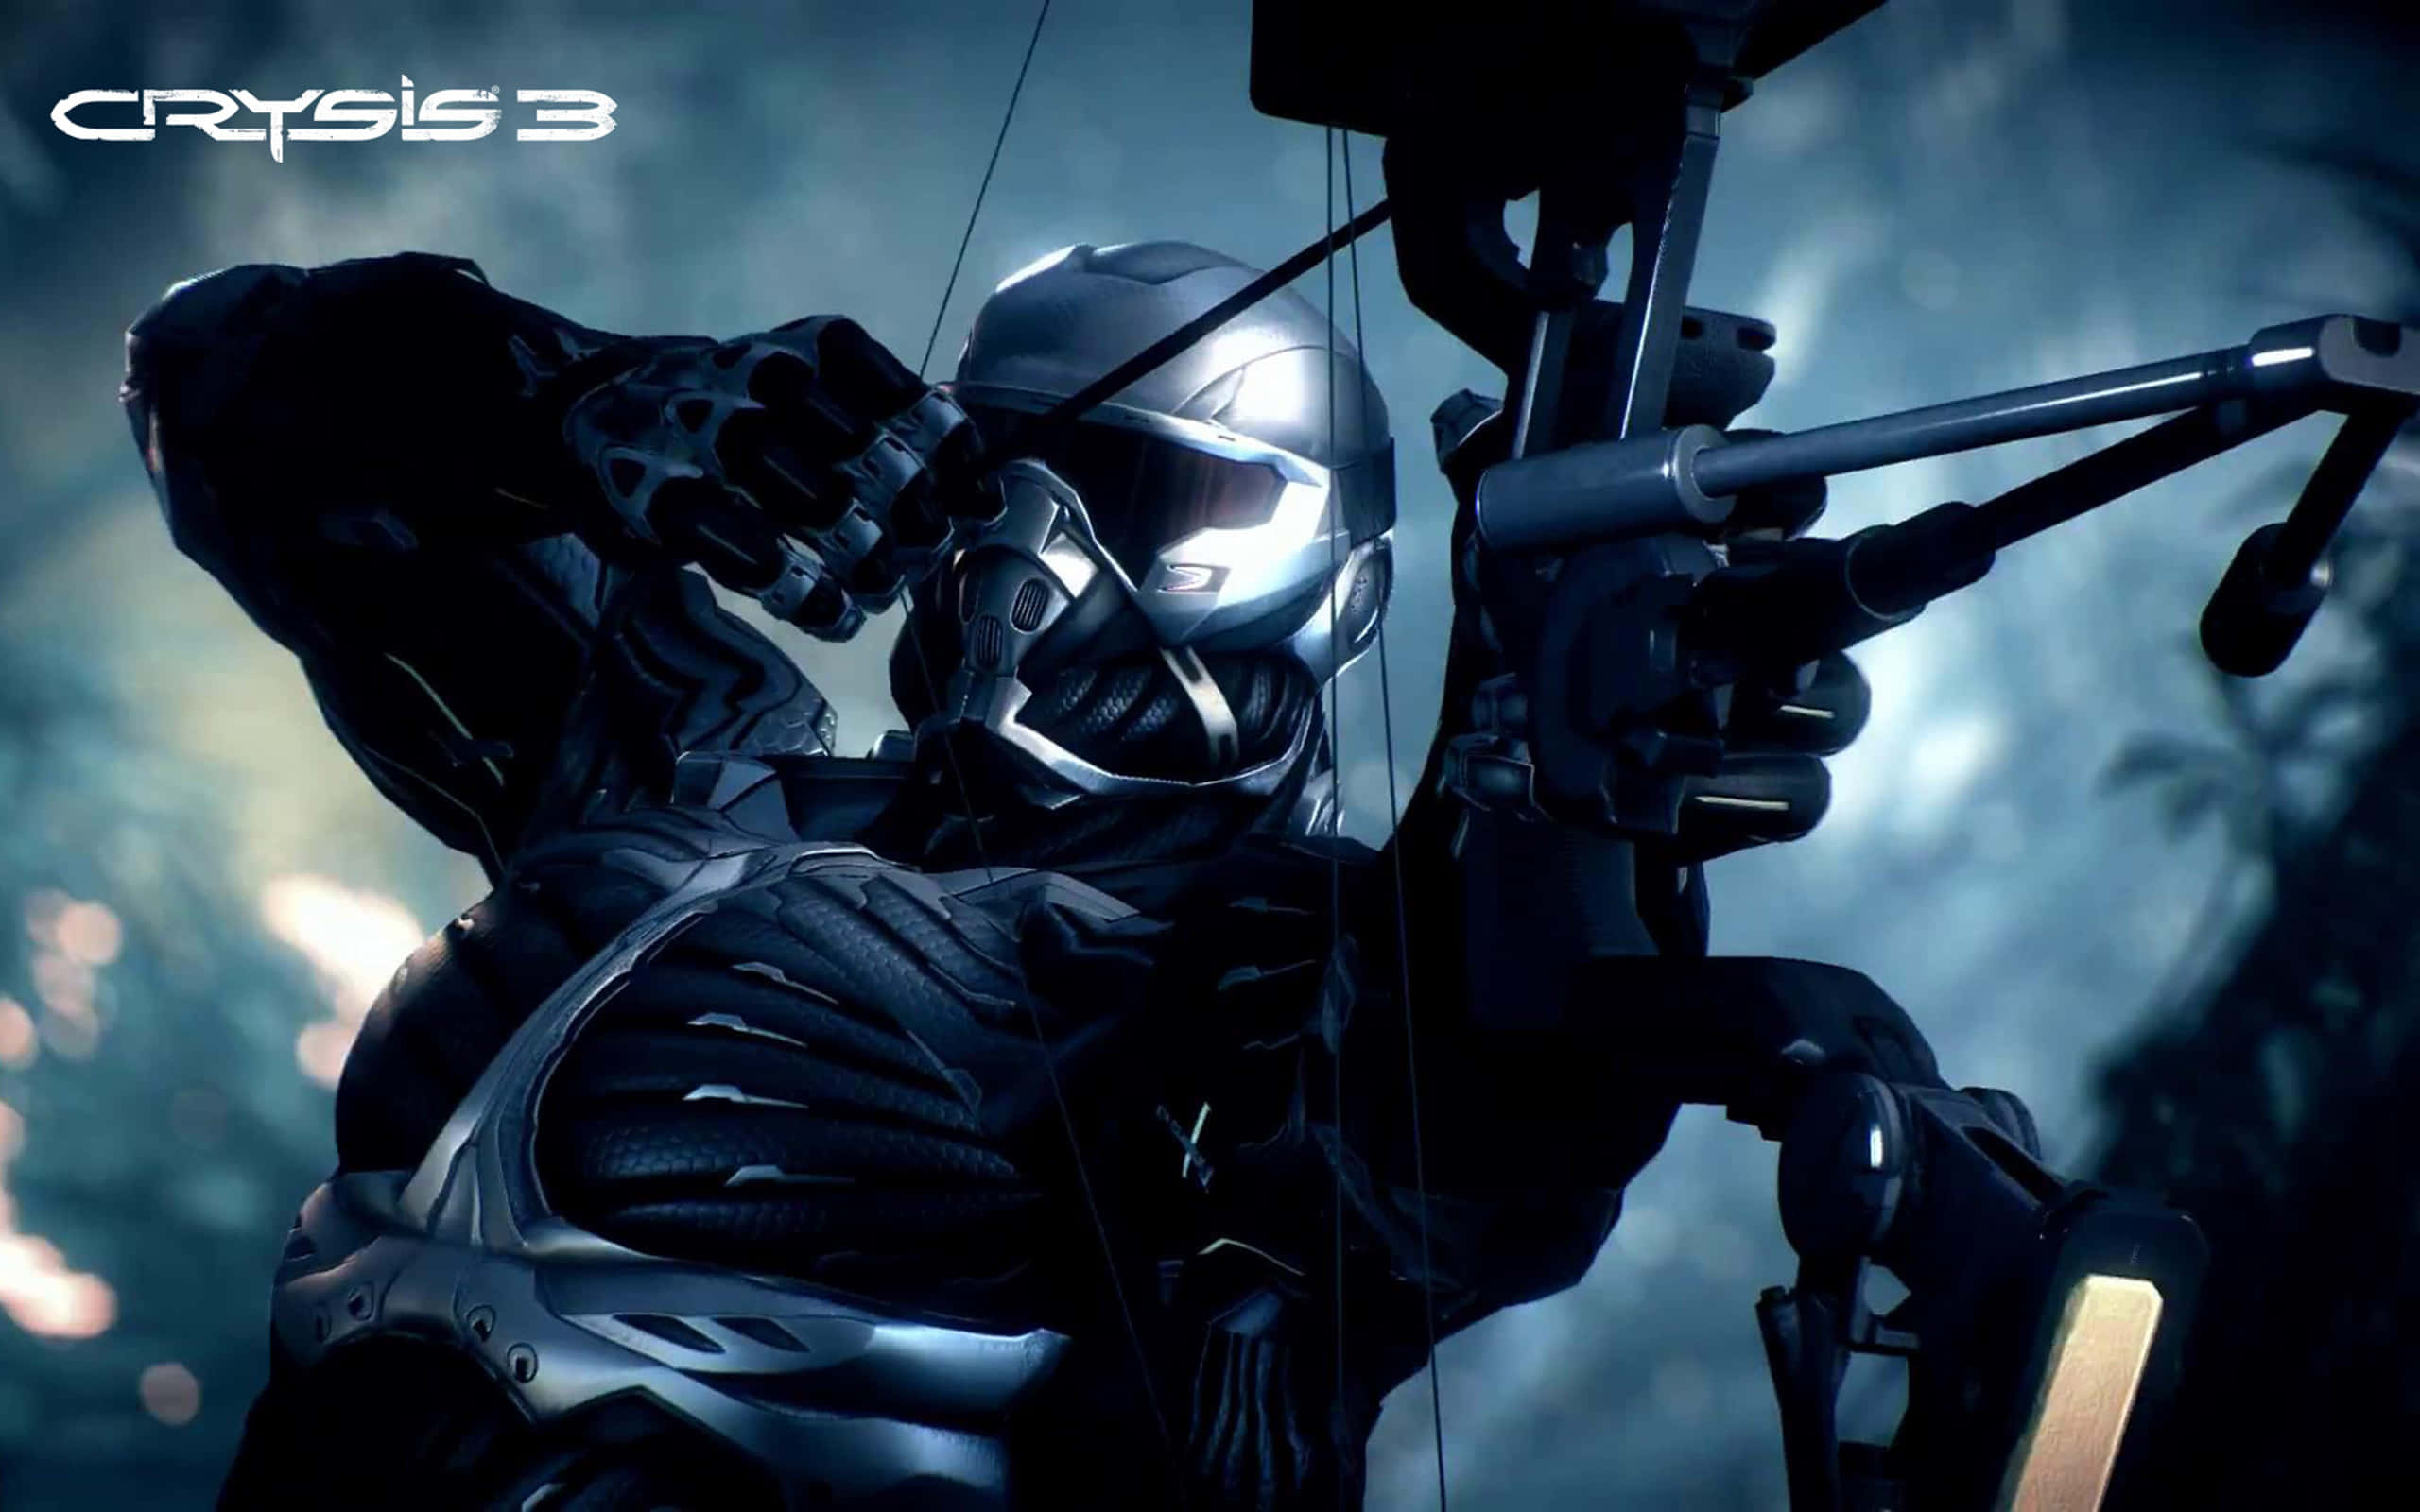 “Survive hostile environments with the advanced Nanosuit of Crysis 3”